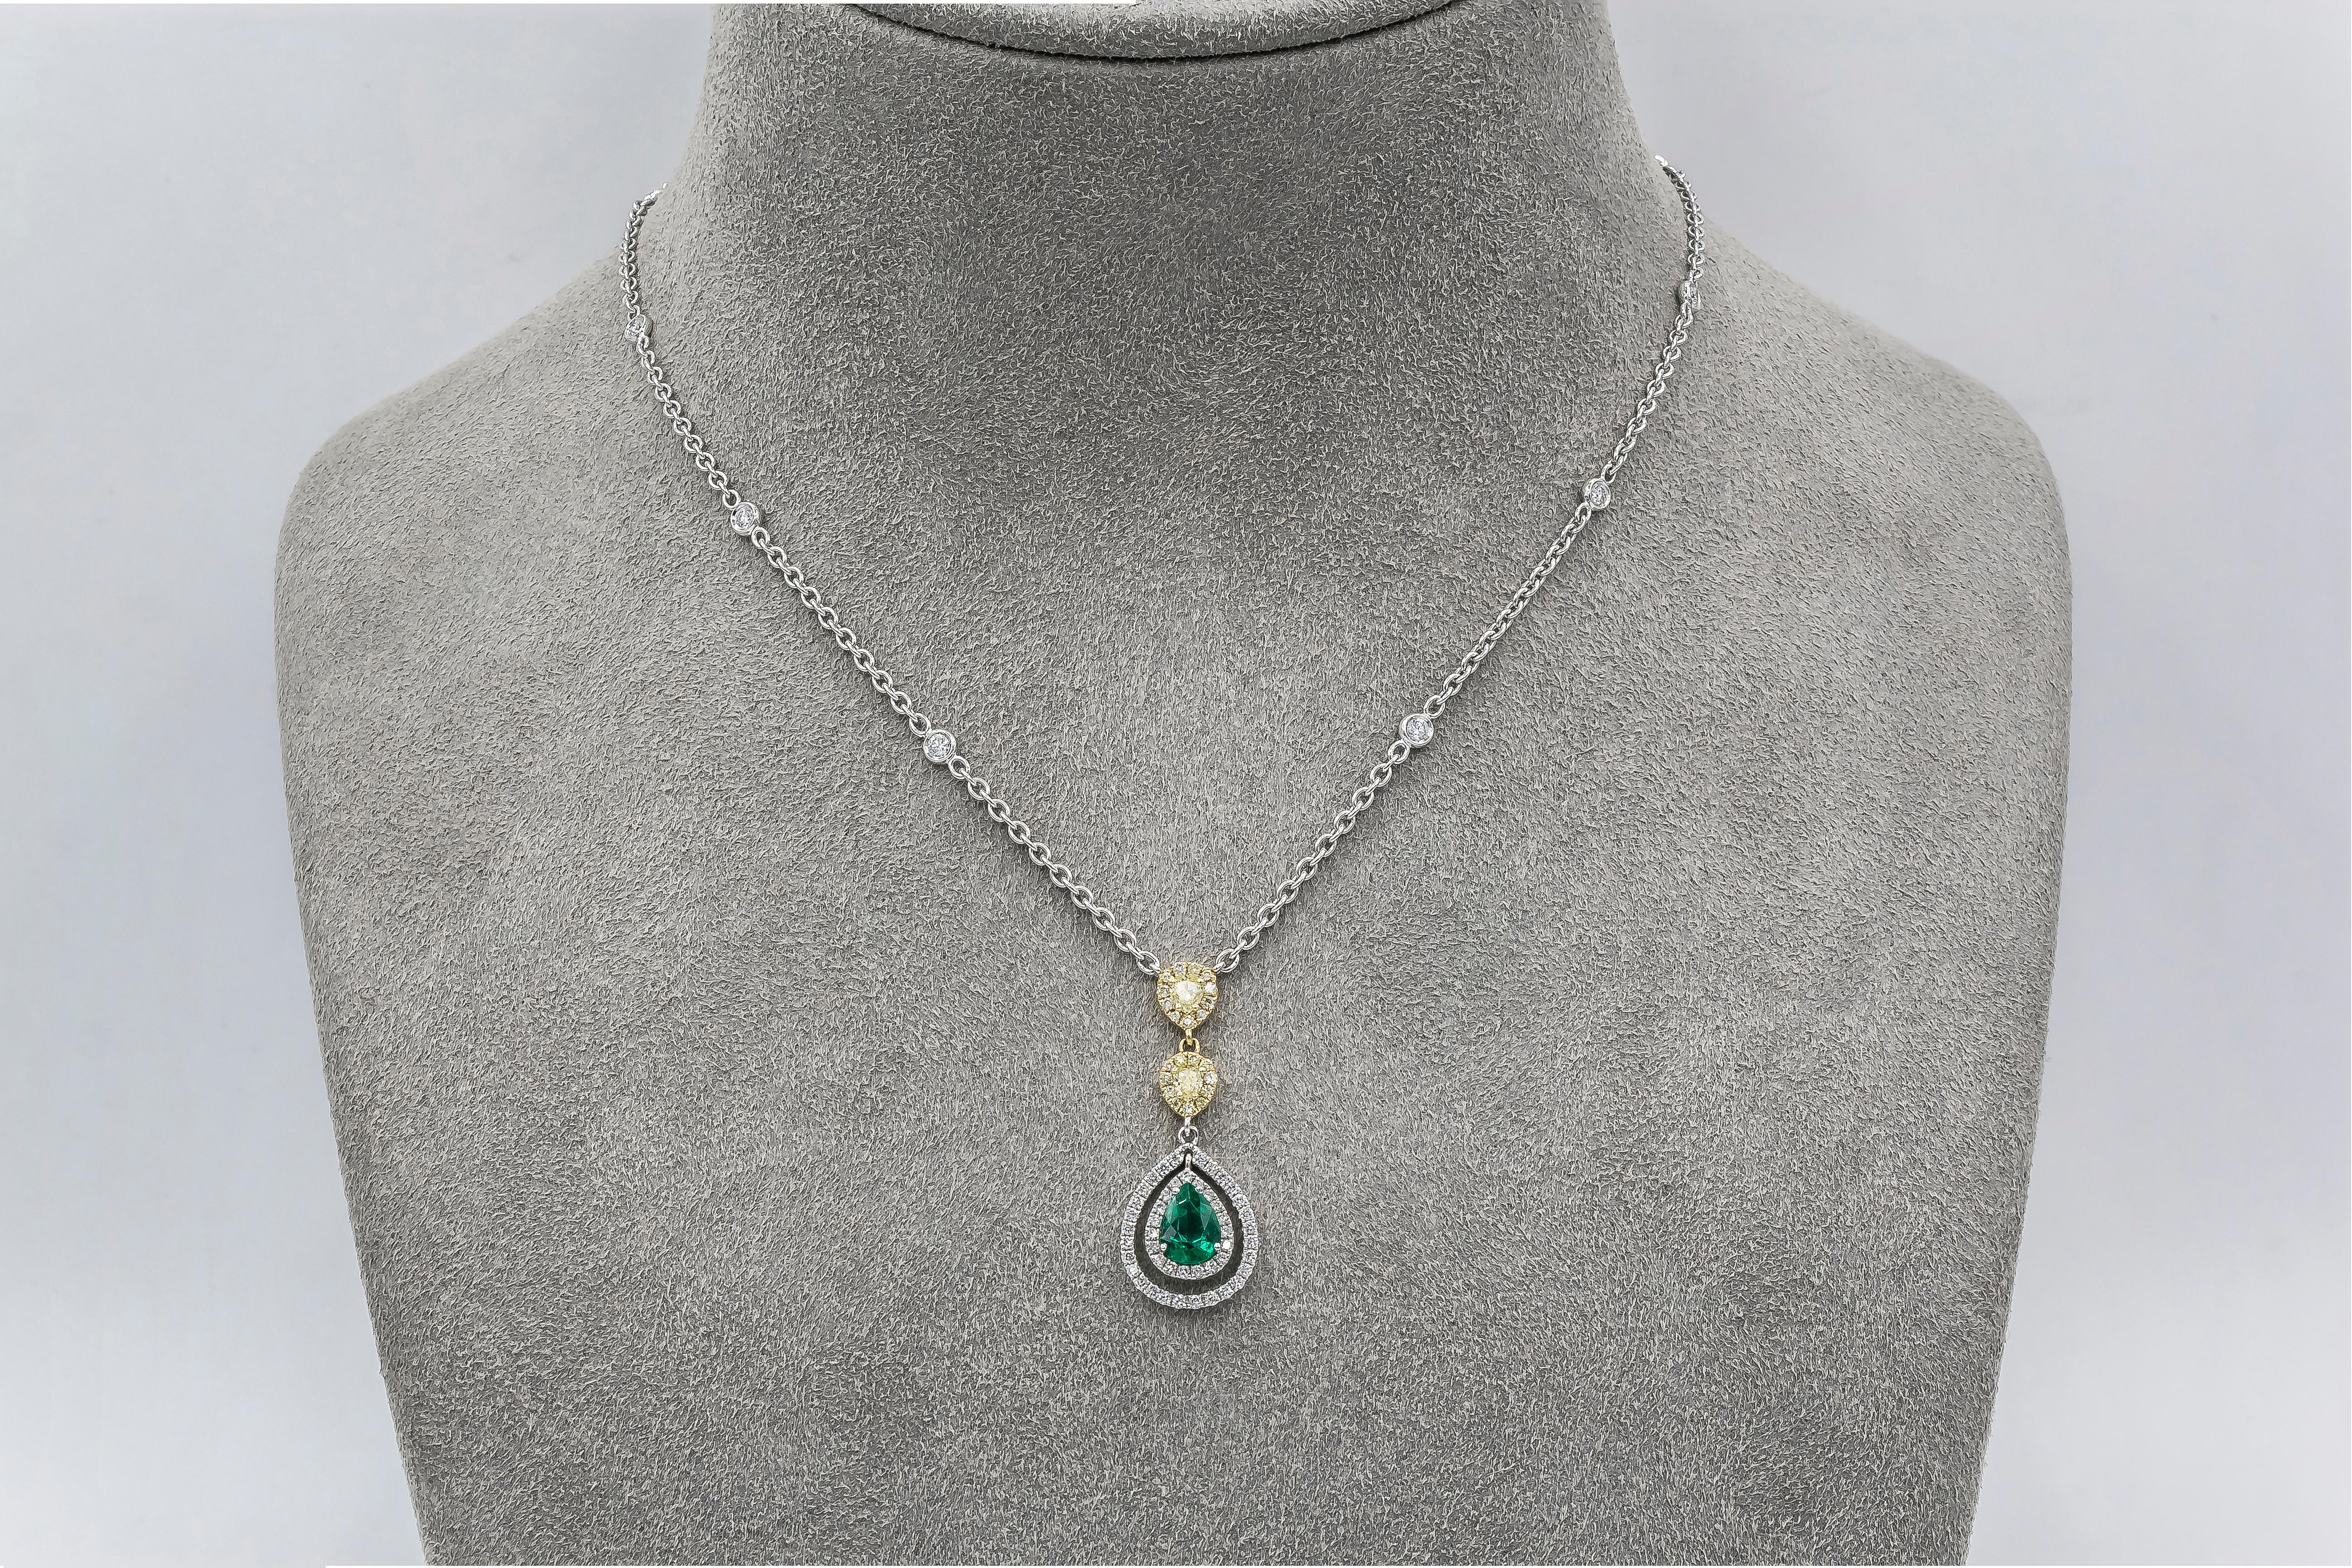 Showcasing 0.68 carat green emerald accented with two rows of round brilliant diamonds. The pendant is suspended on a two pear shape yellow diamond halos, attached to a diamonds by the yard chain. Diamonds weigh 0.58 carats total; yellow diamonds